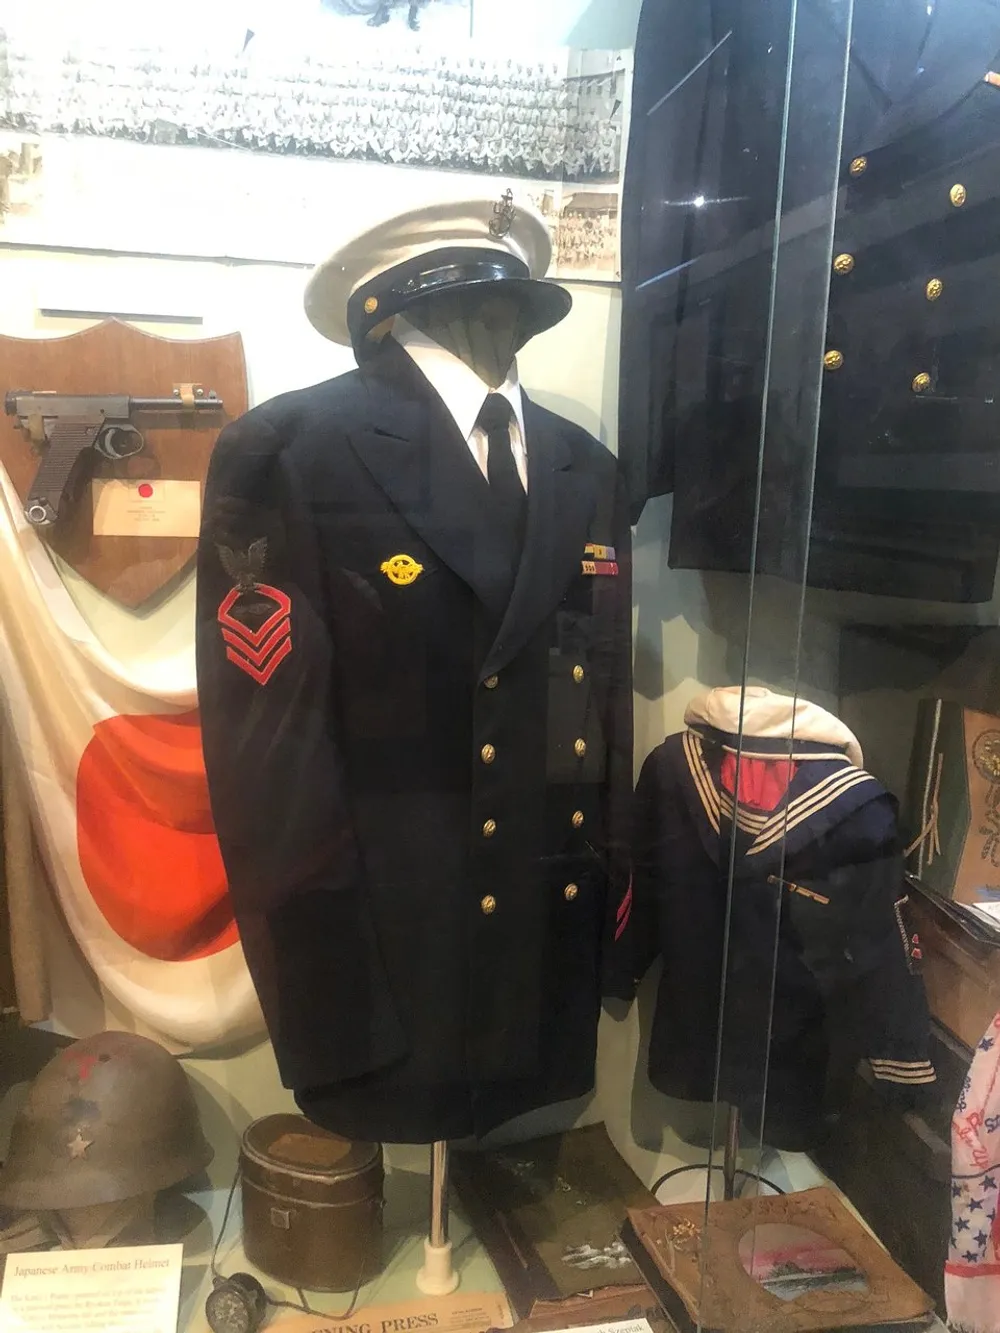 The image shows a collection of military uniforms and artifacts displayed in a glass case with a prominent navy jacket and hat on a mannequin suggesting a historical or educational exhibit possibly within a museum